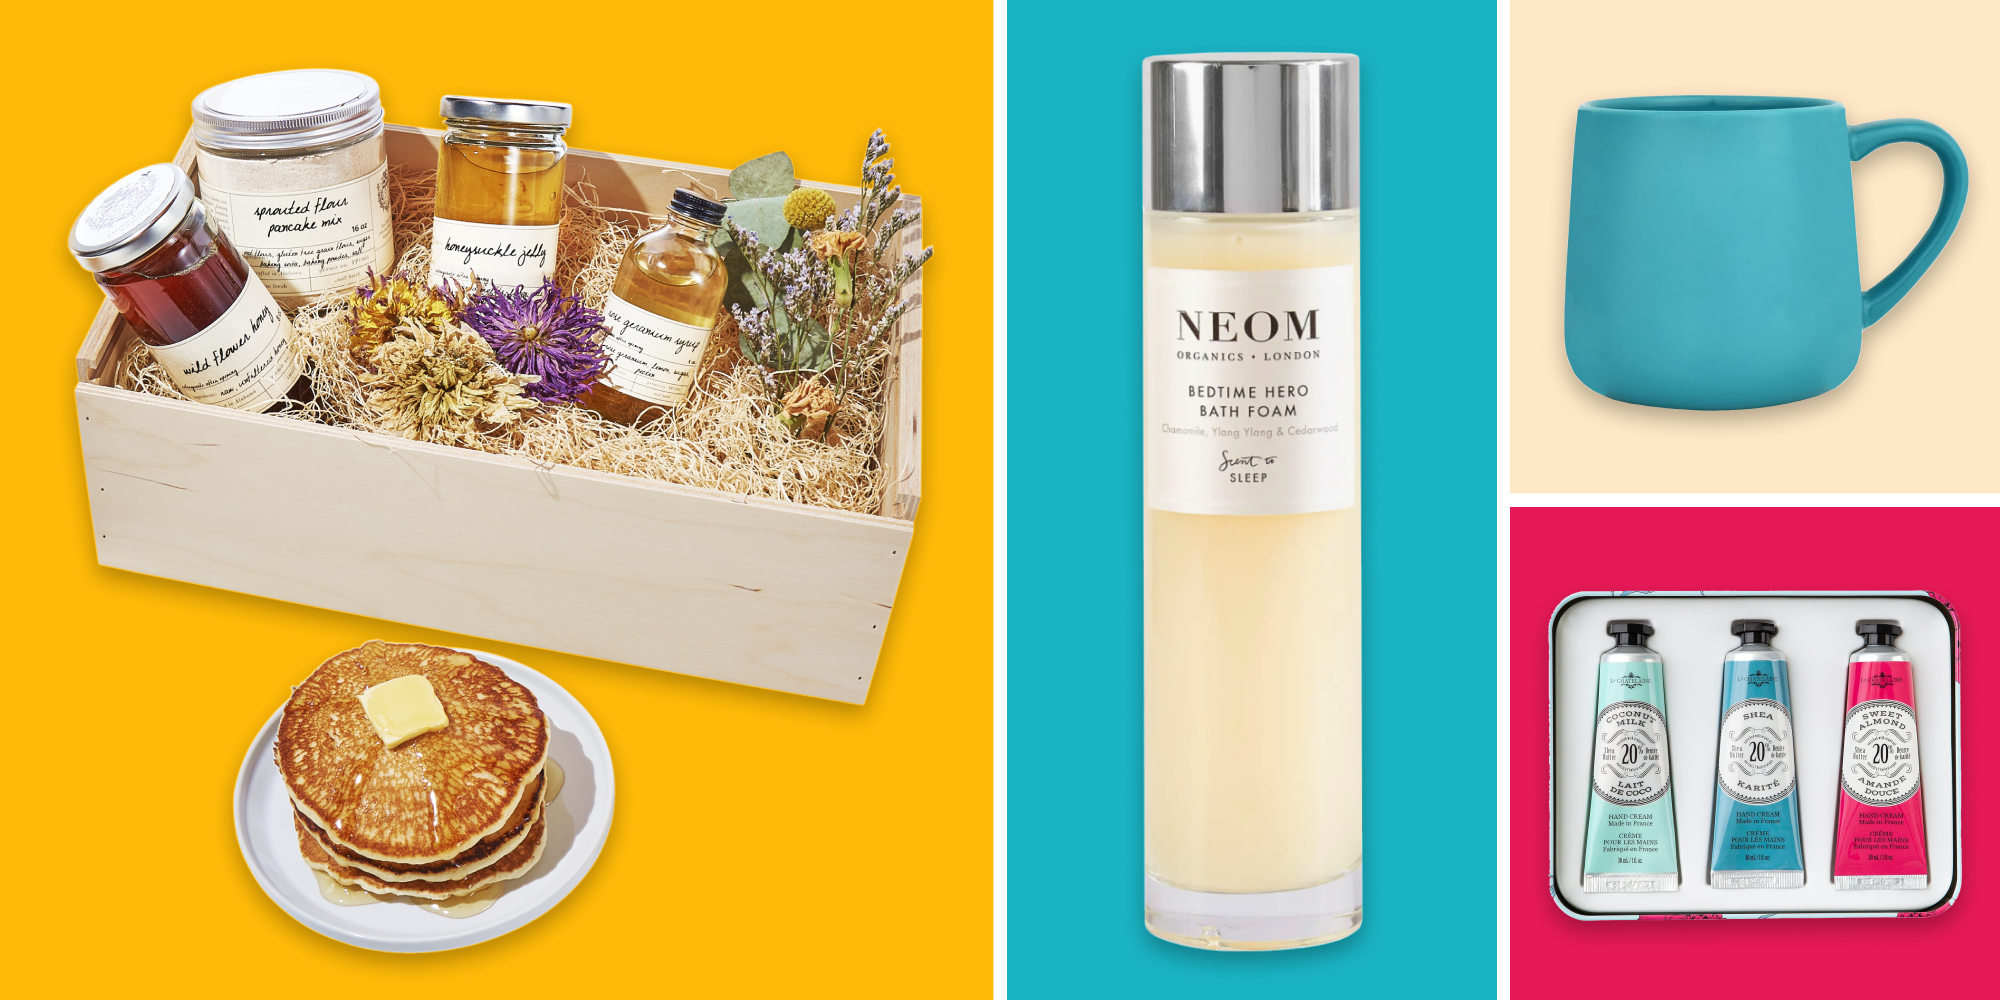 The Ultimate Bathroom Toiletry Essentials For A Holiday - Beauty Baking  Bella